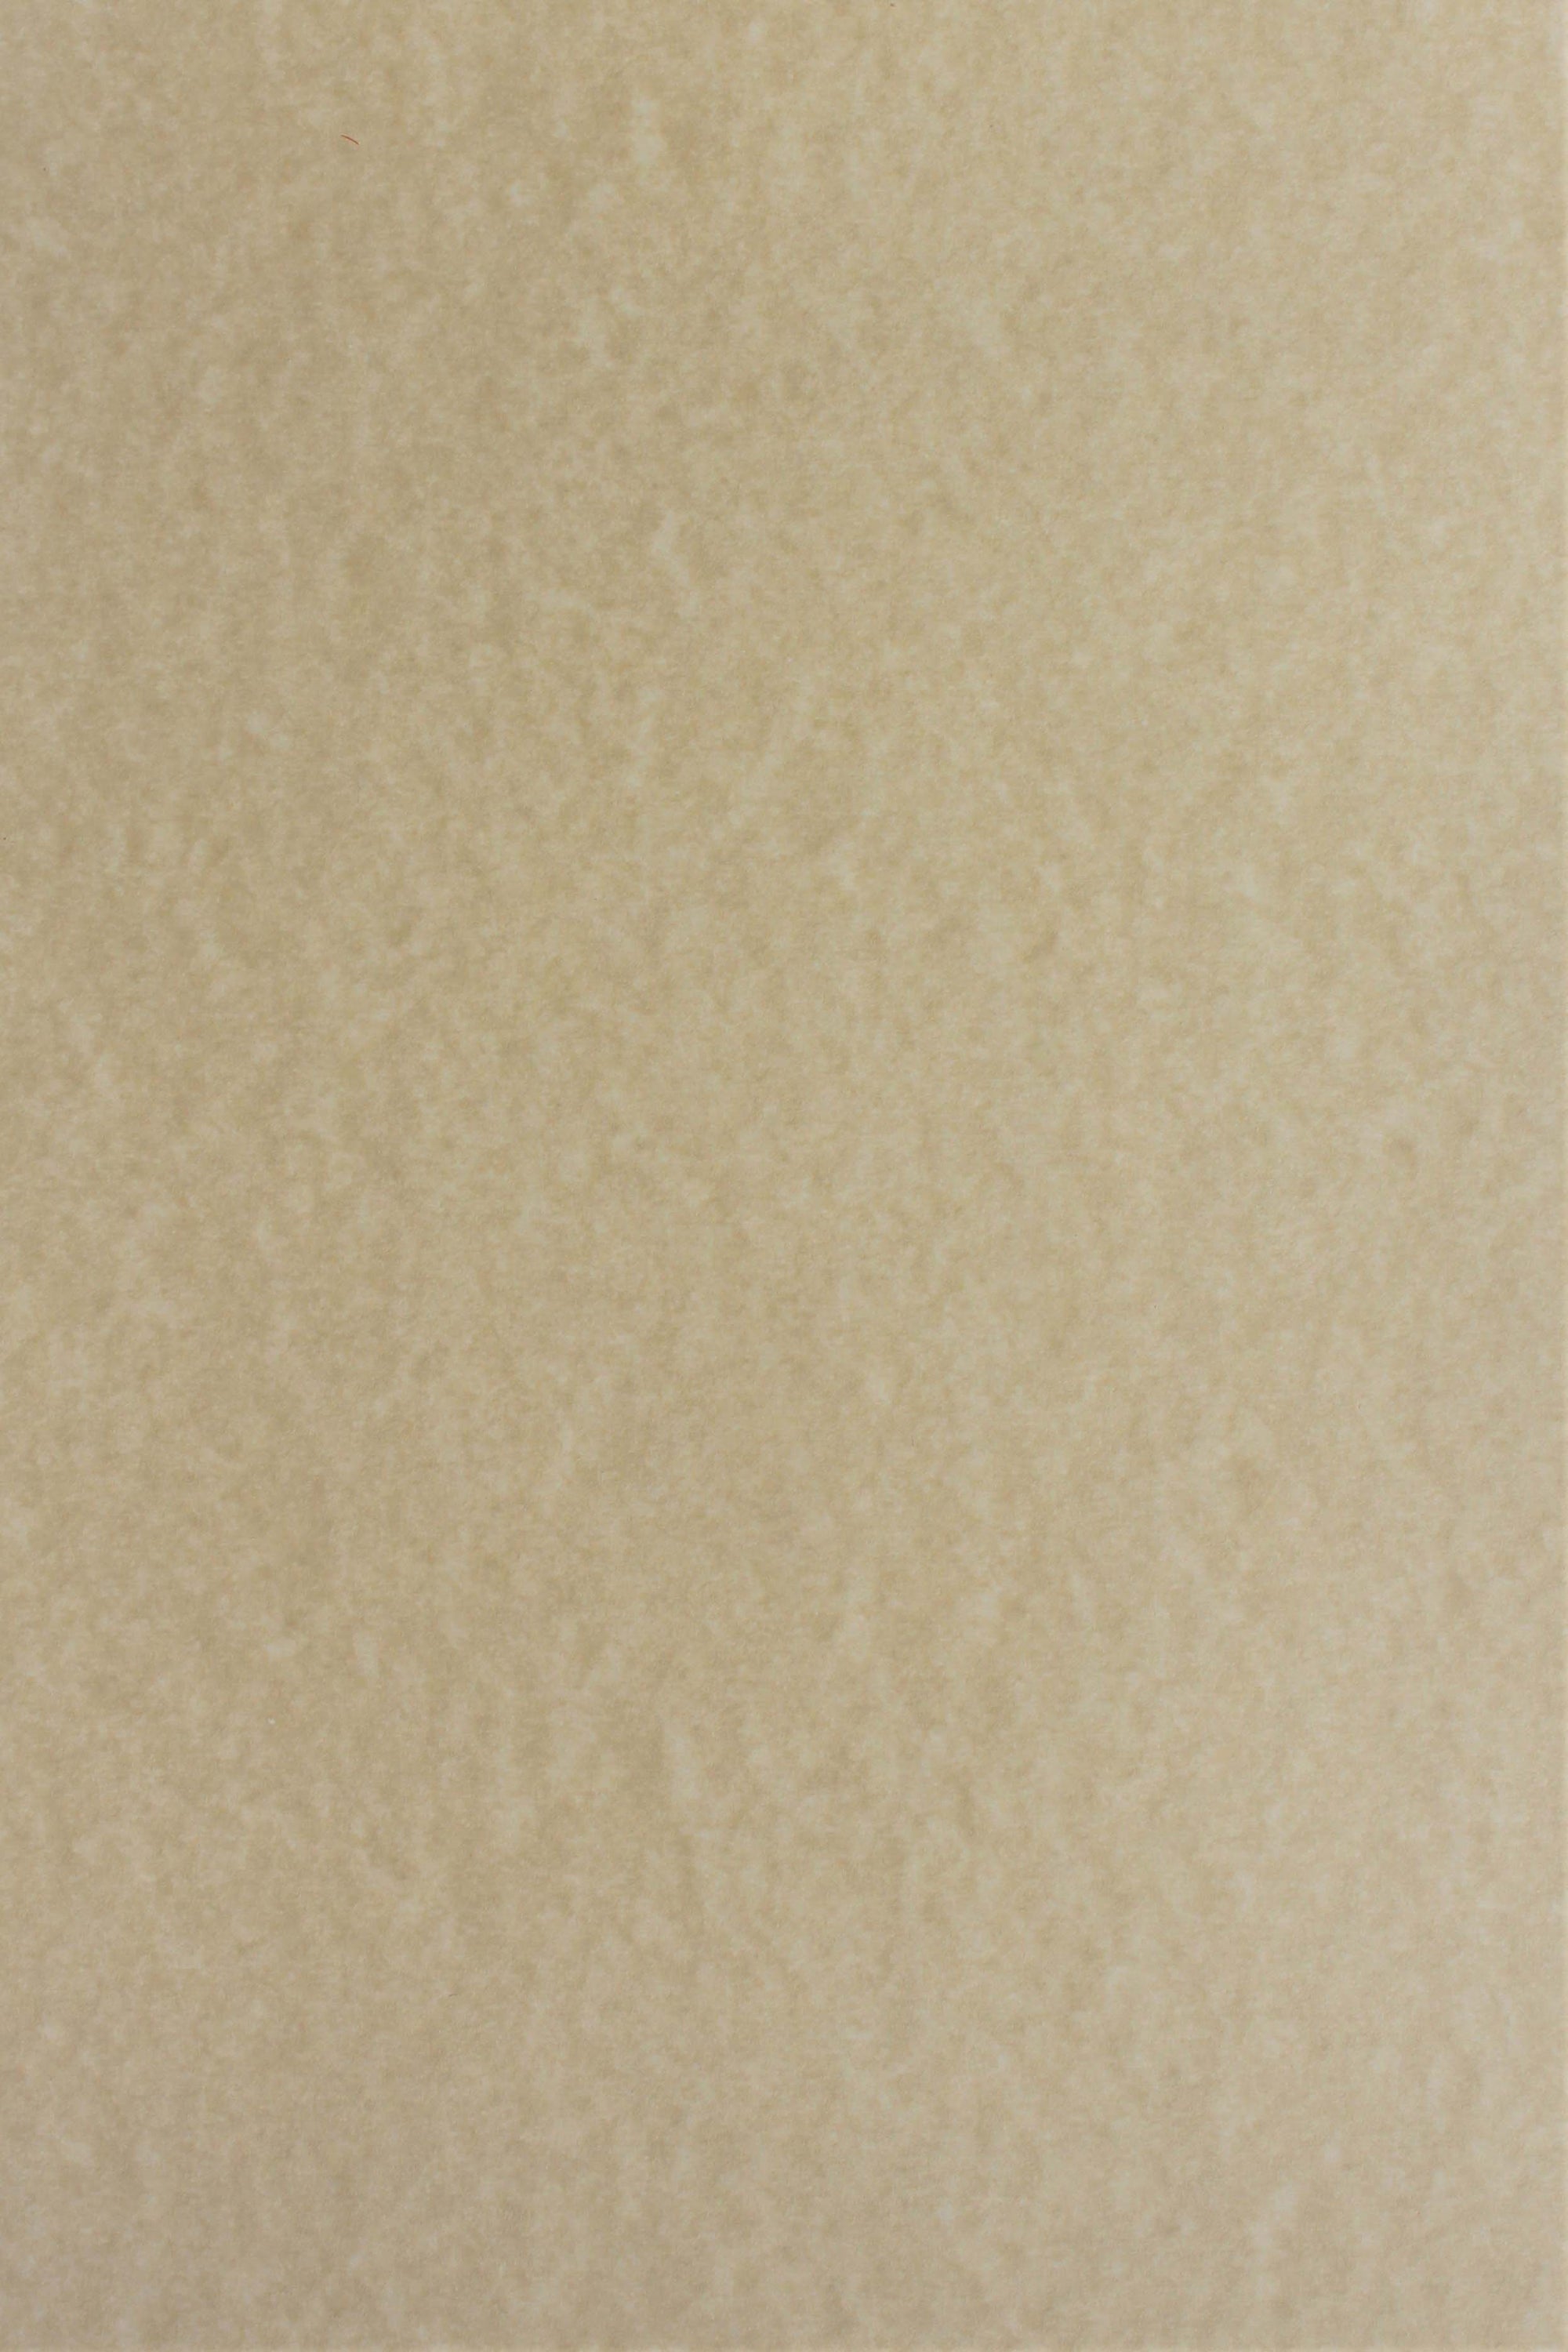 Italic Parchment 175gsm Cream - Liberties Papers